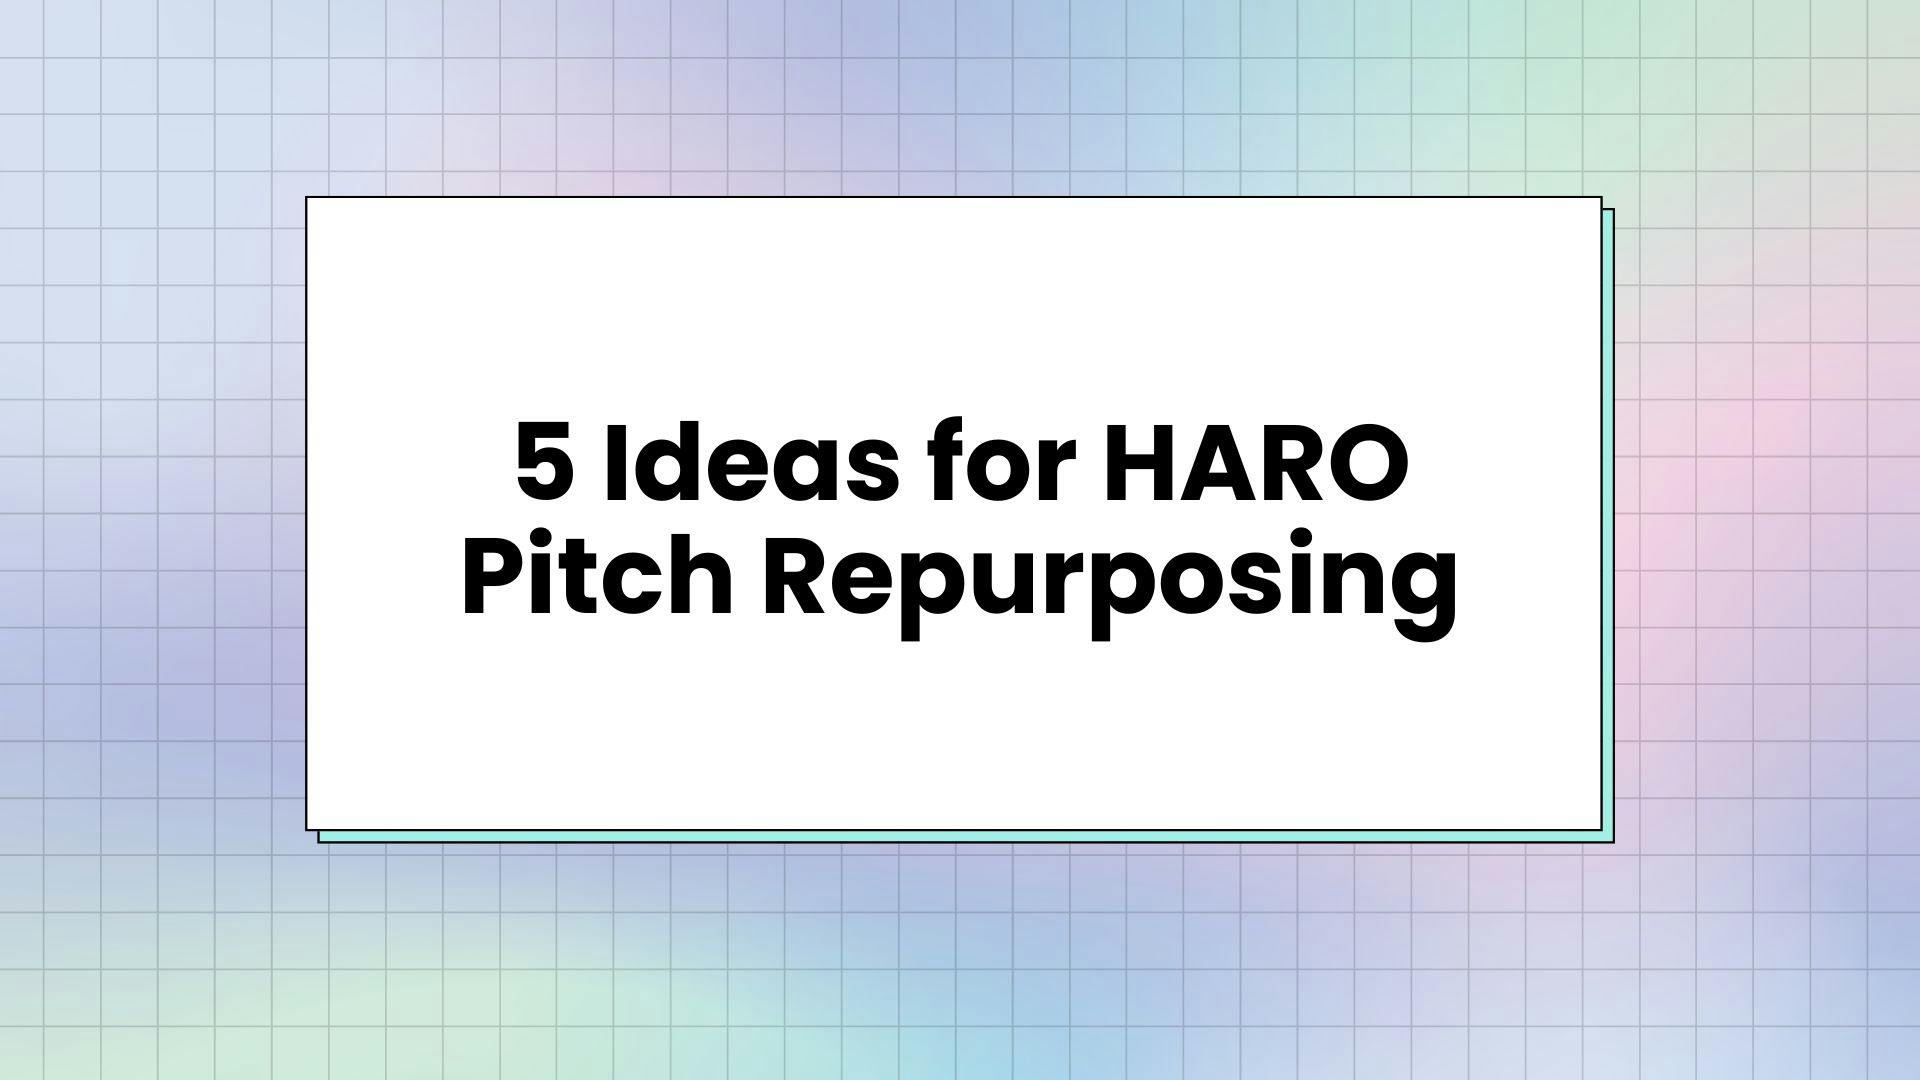 Cover Image for 5 Ideas for HARO Pitch Repurposing